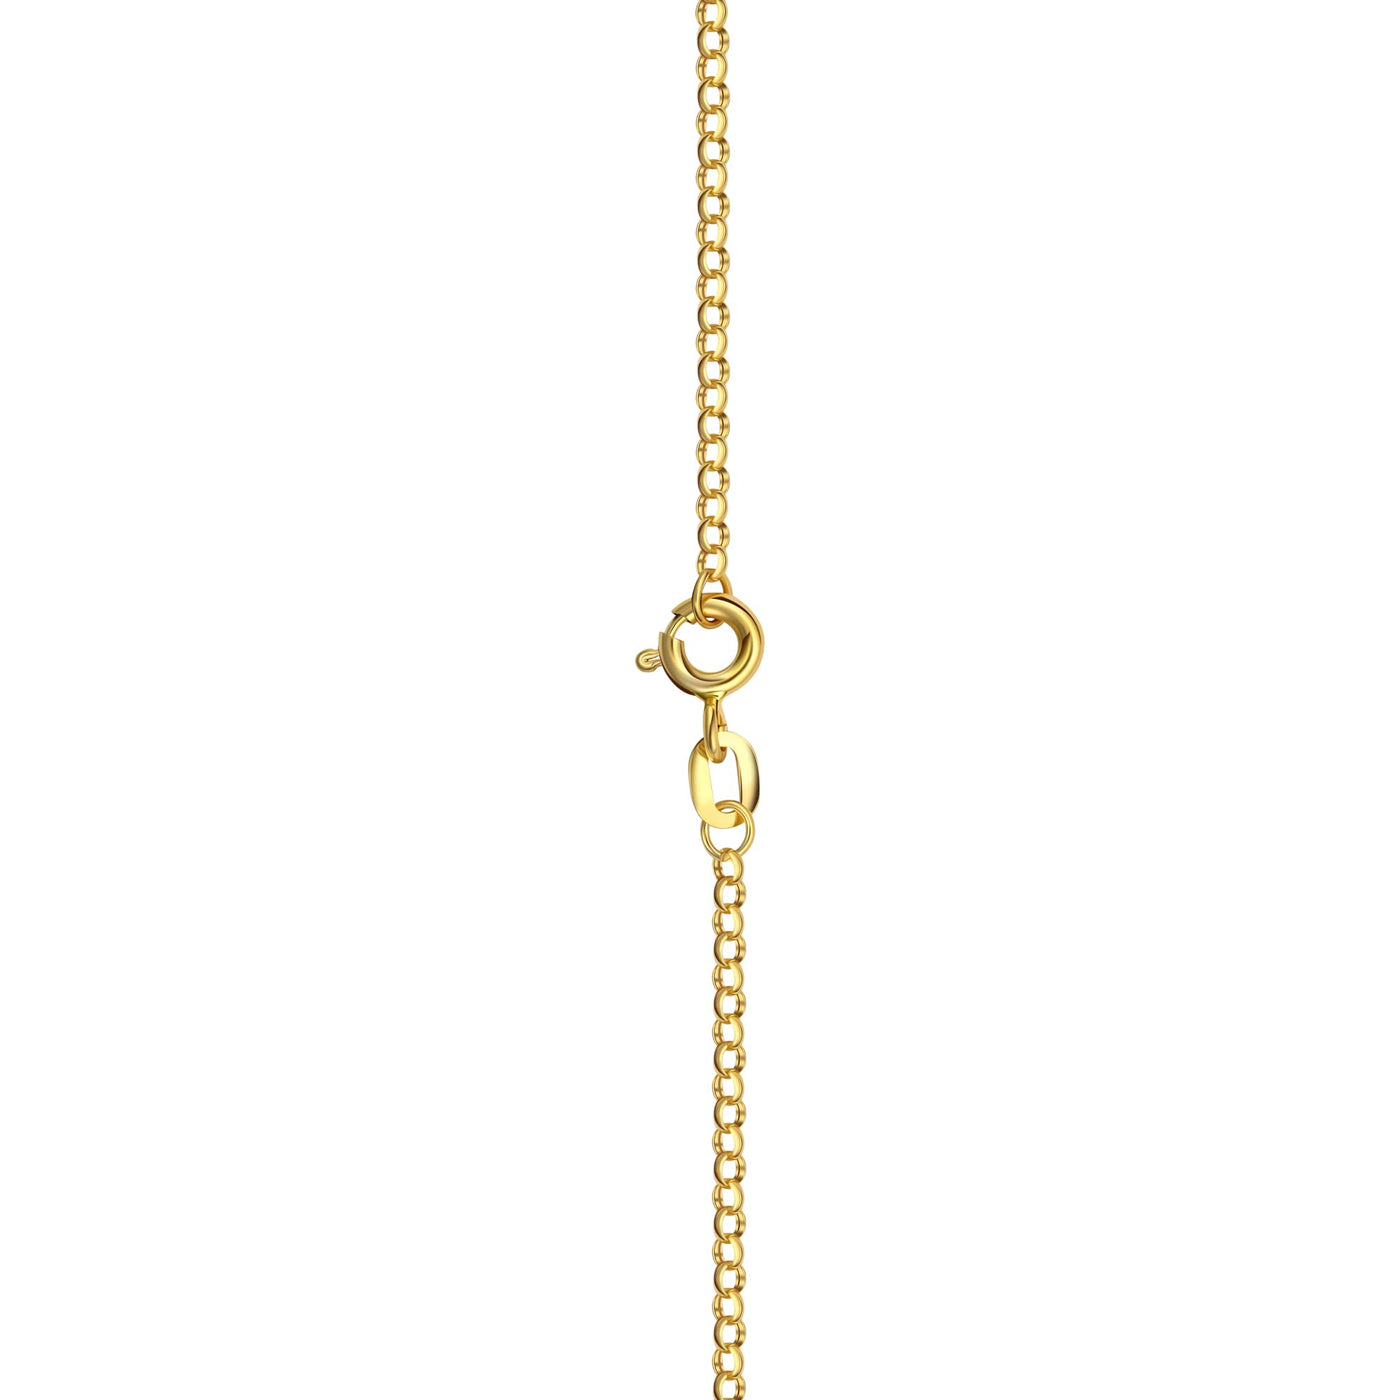 10K Gold 2.0MM Round Rolo Link Chain Necklace